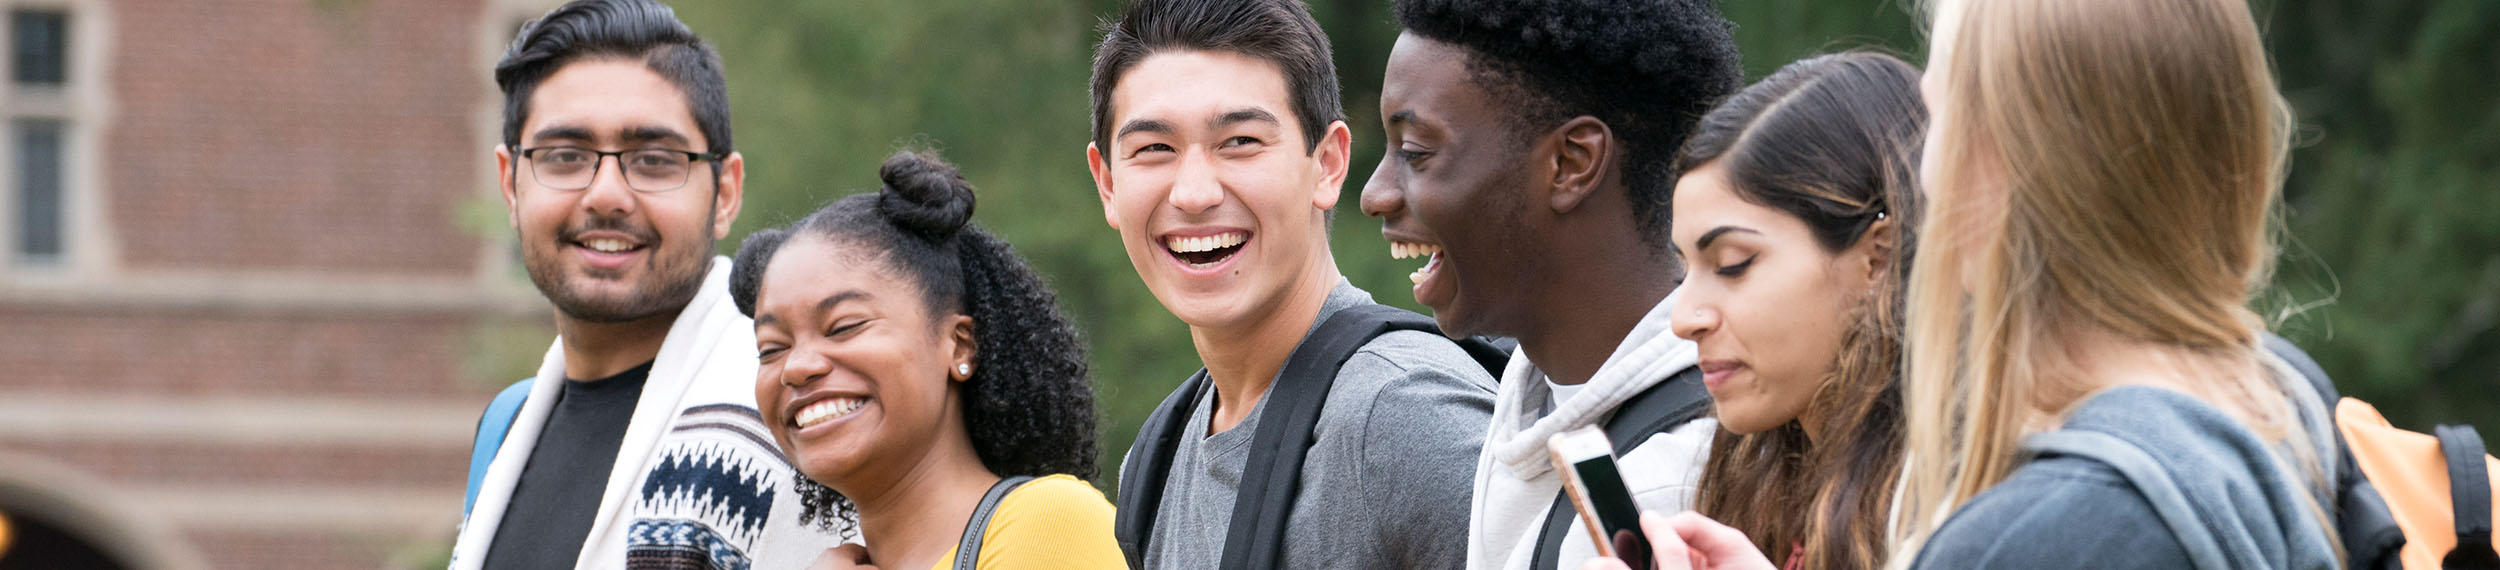 A group of students laughing together on campus. 